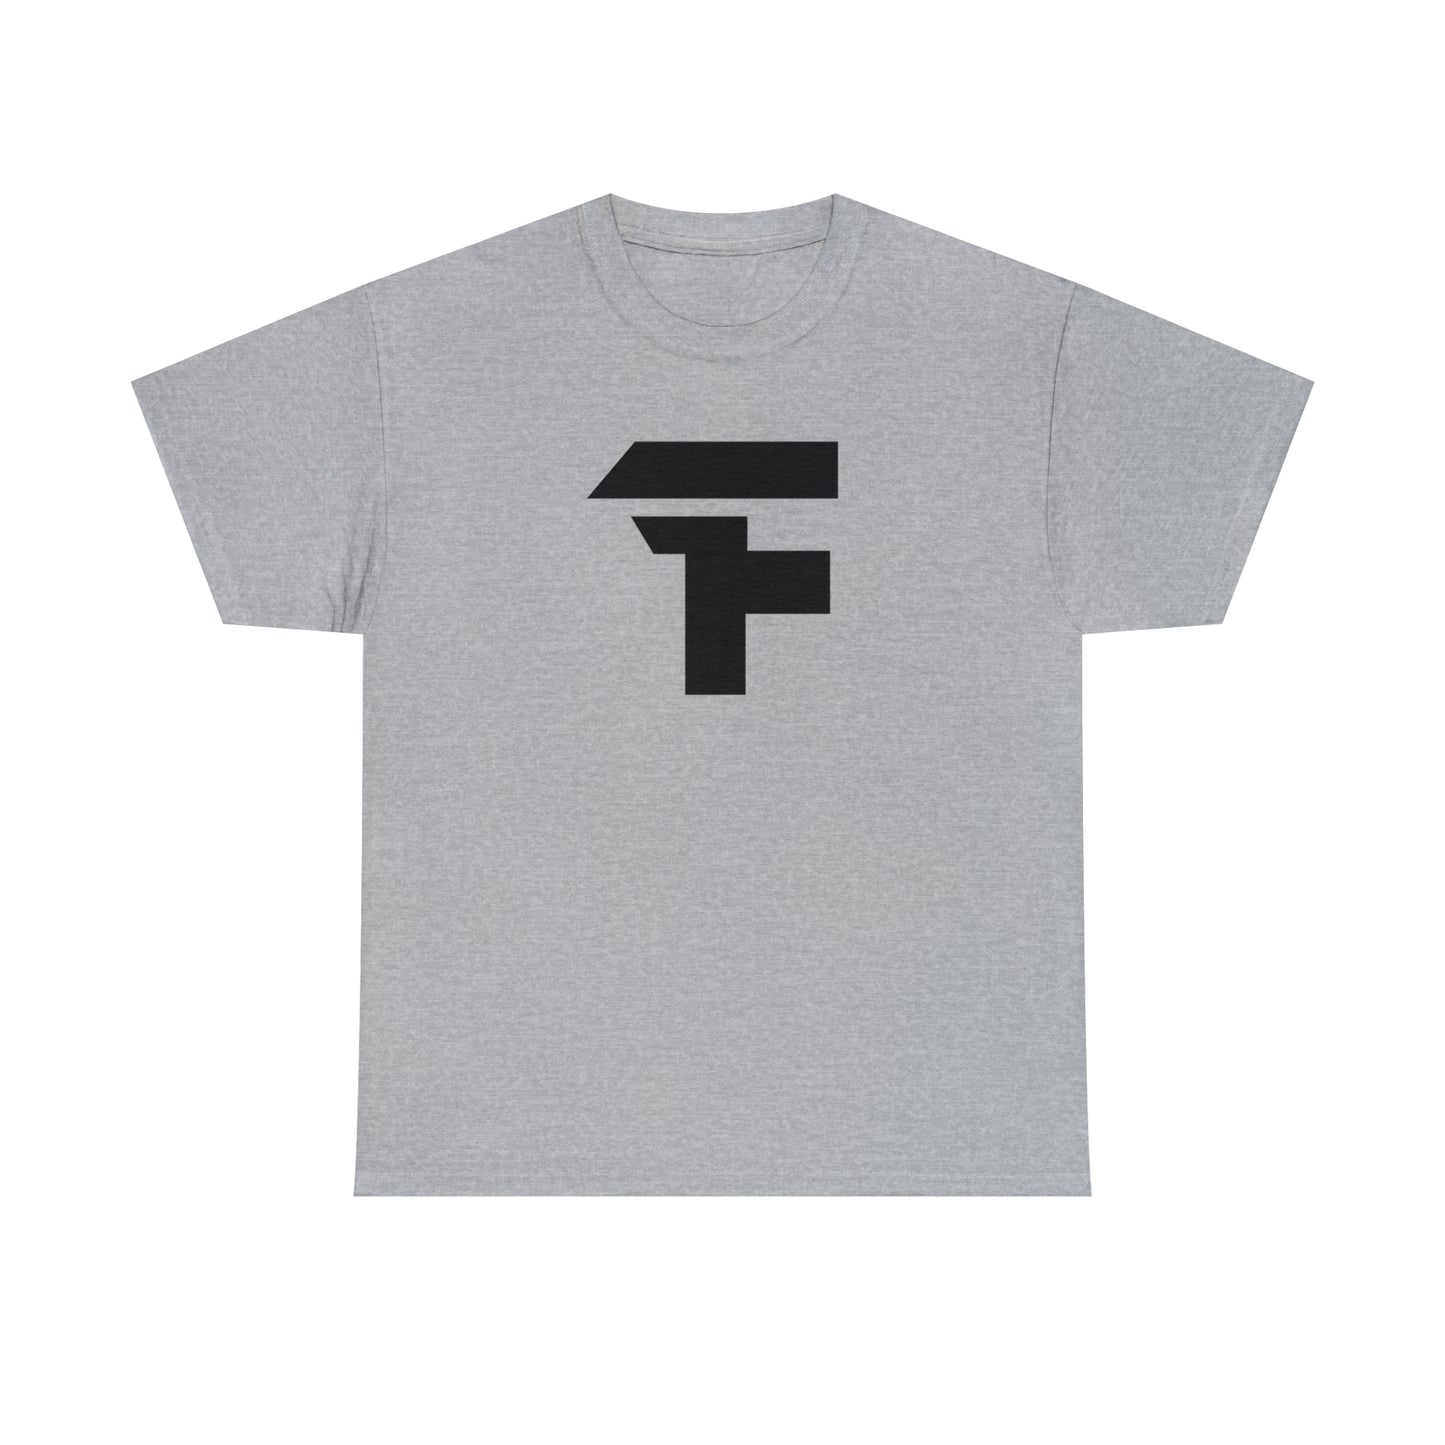 Francis Thorne "FT" Tee